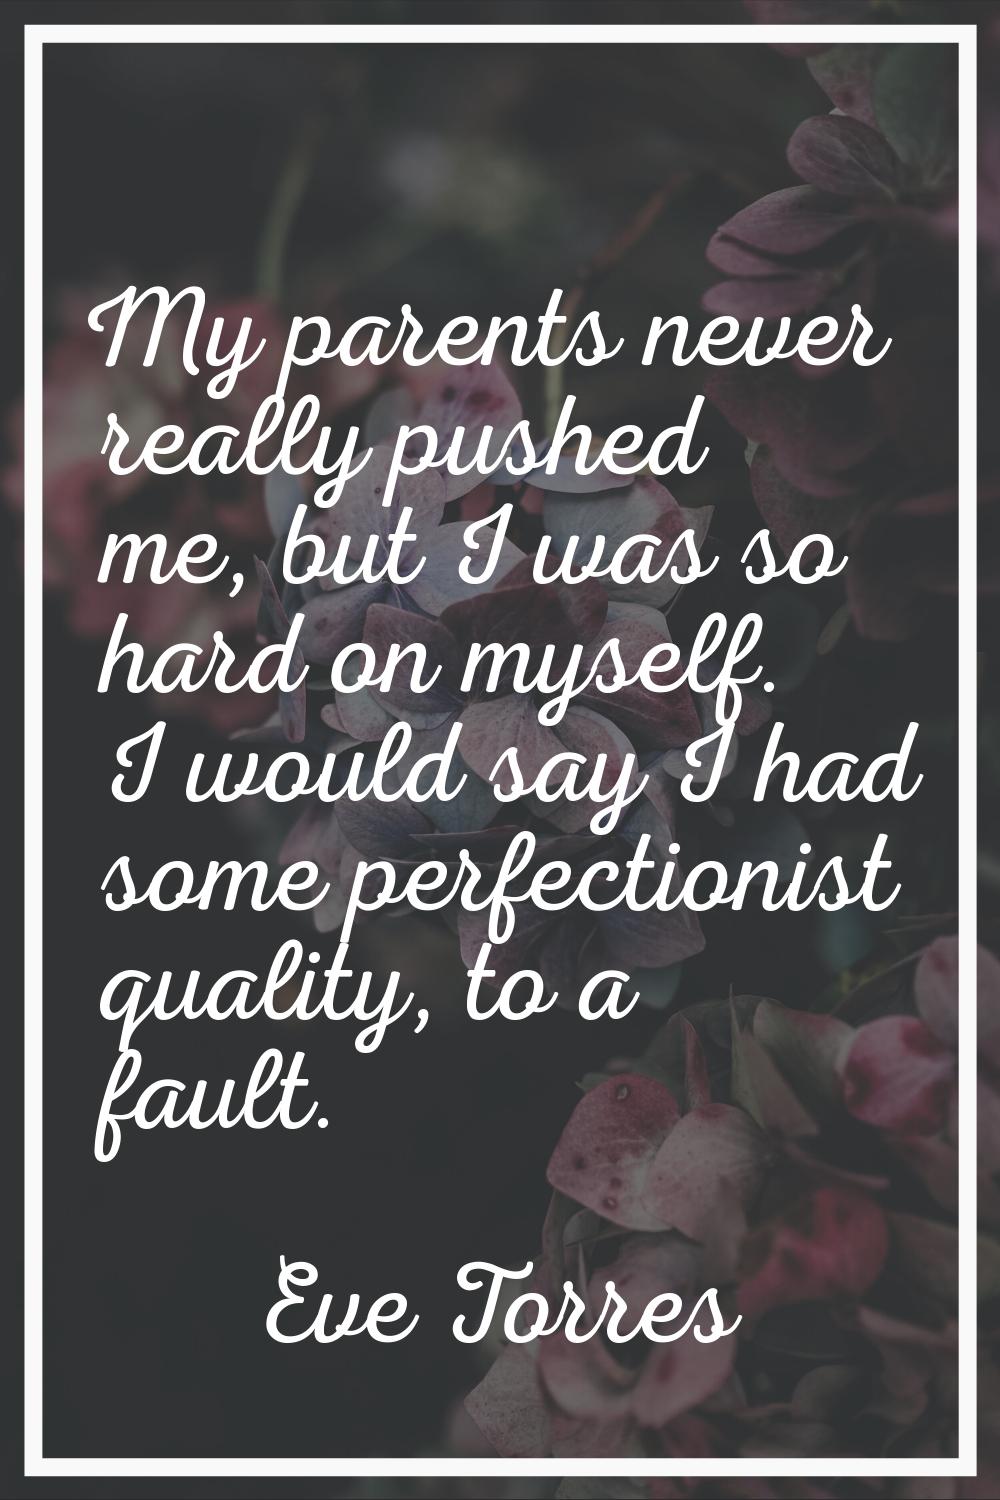 My parents never really pushed me, but I was so hard on myself. I would say I had some perfectionis